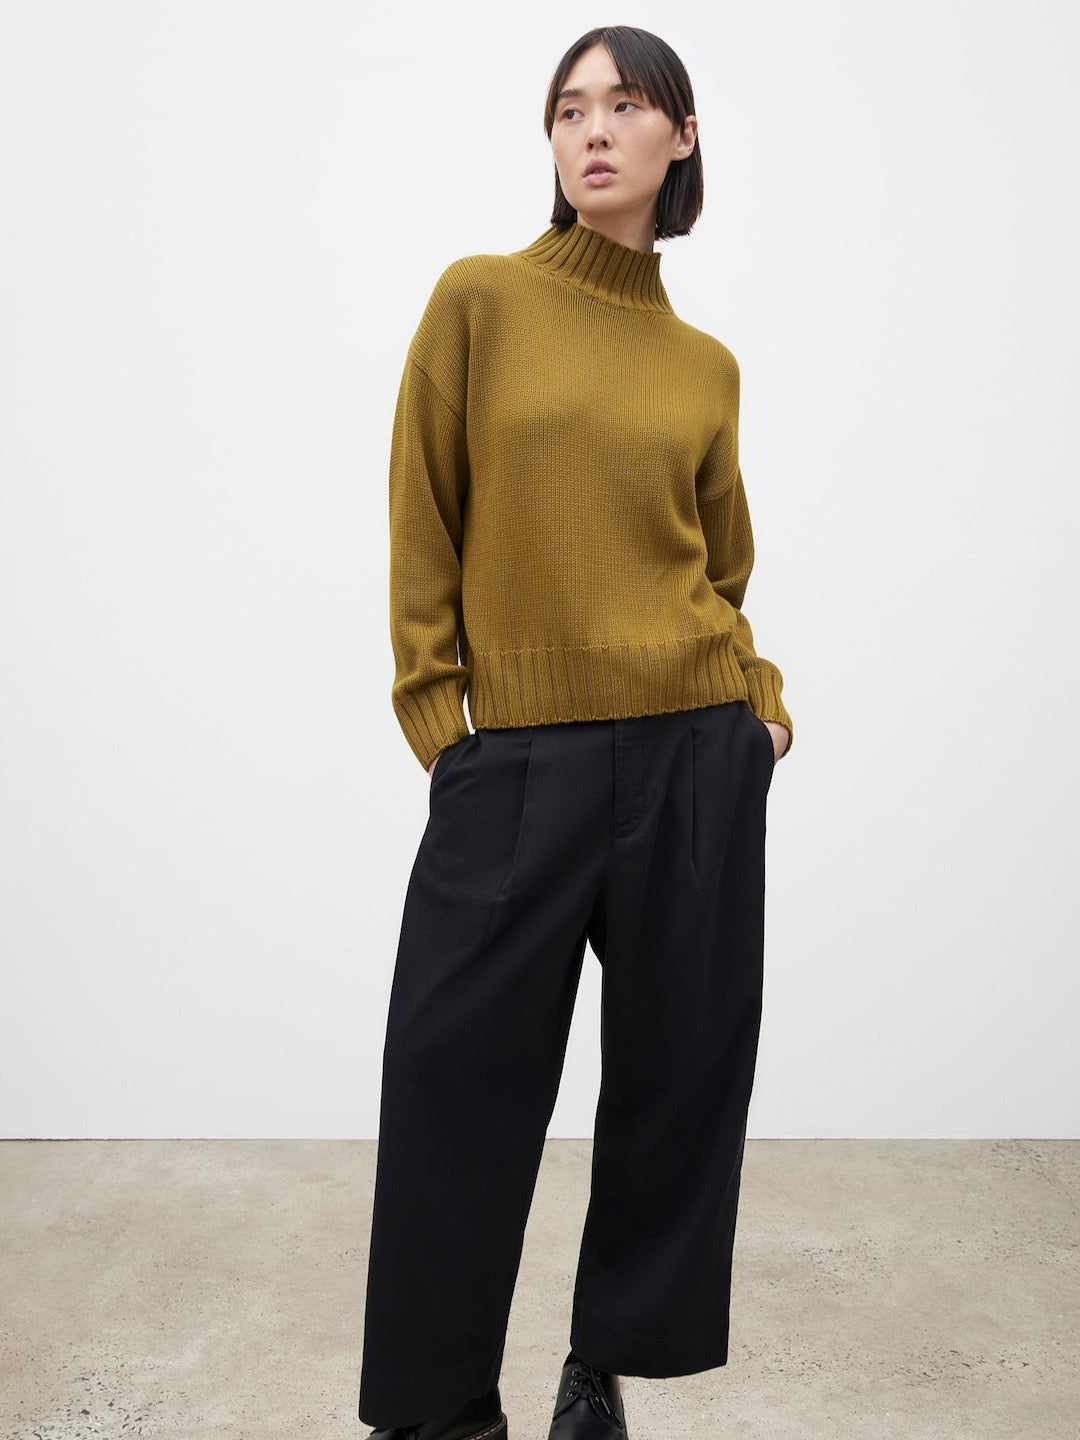 The model is wearing a Kowtow Chartreuse Staple Sweater and black wide leg pants.